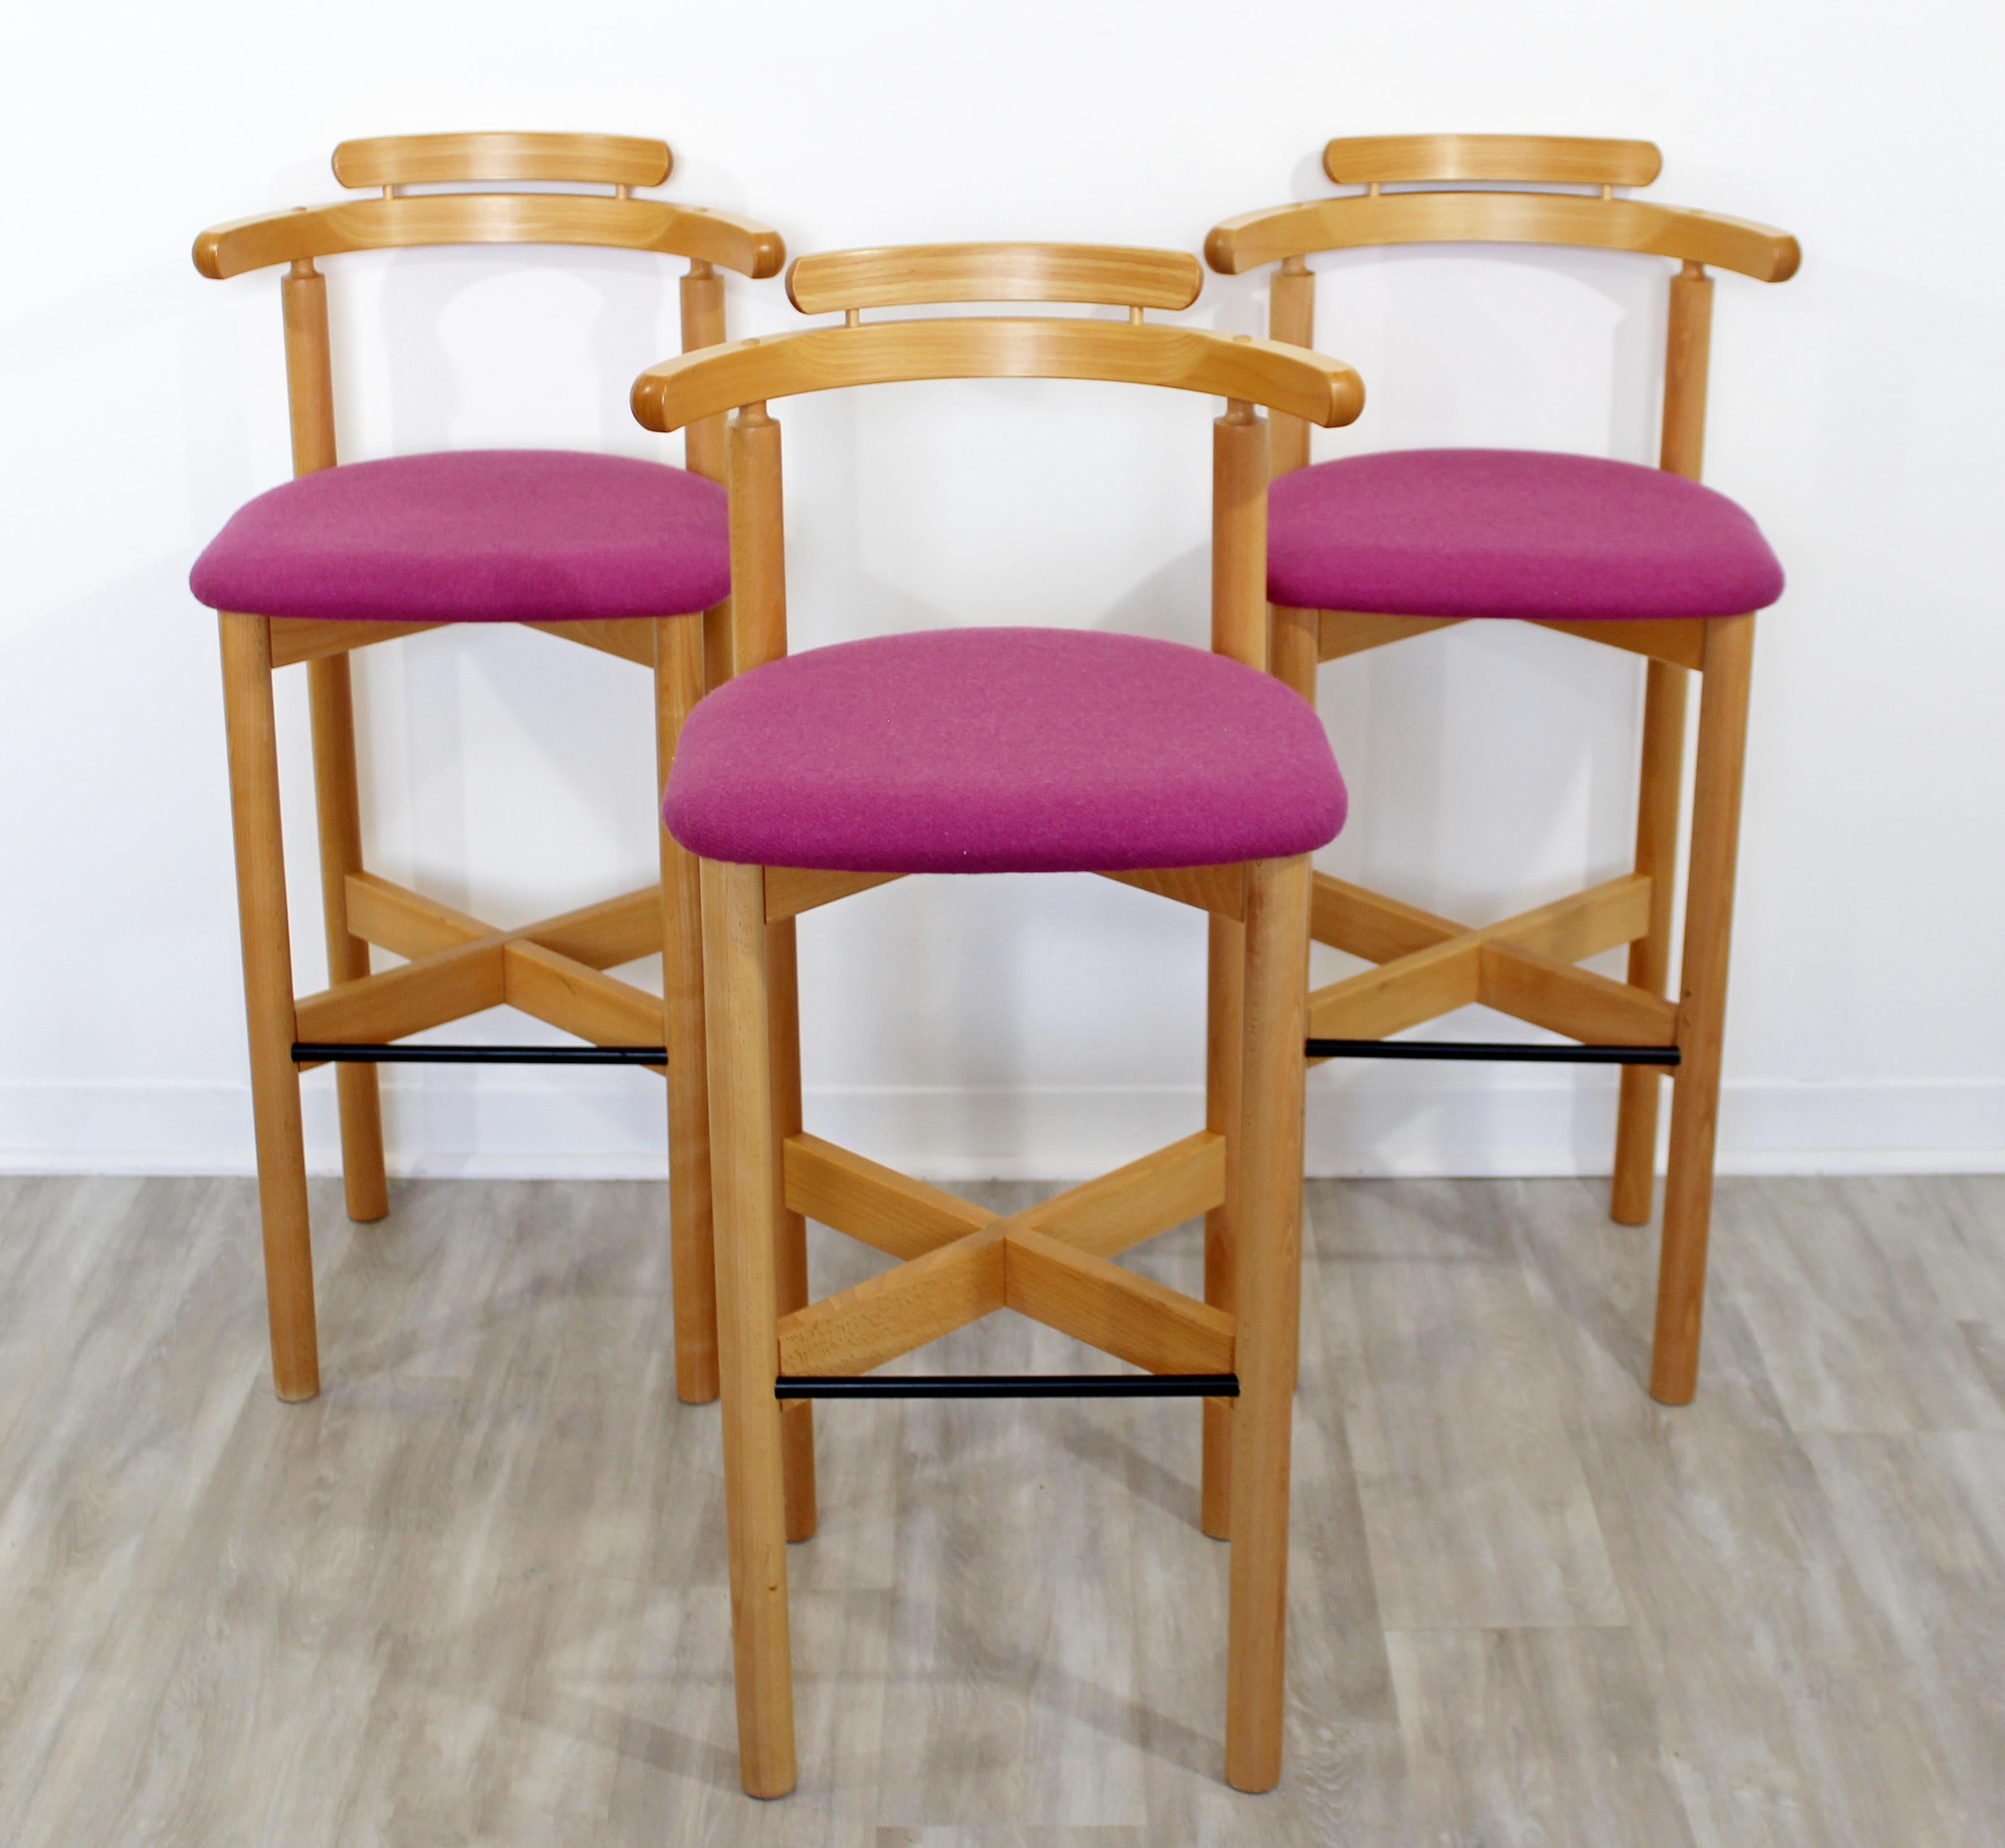 For your consideration is a wonderful set of three, tall bar stools, blonde wood bases, by Gangso Mobler, made in Denmark. In excellent condition. The dimensions are 17.5